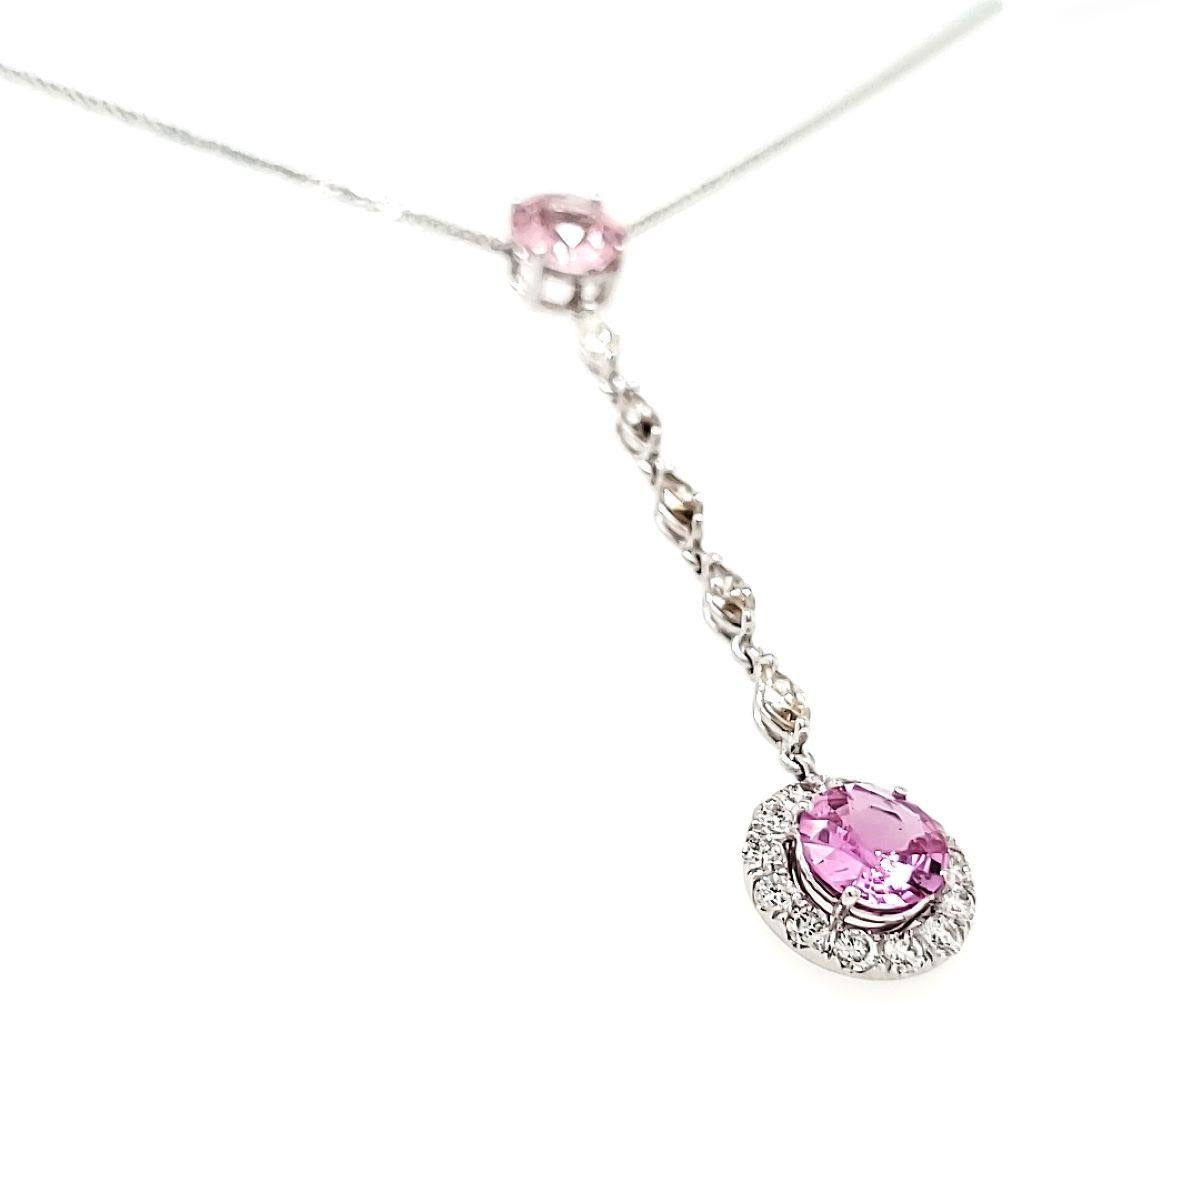 Round Cut Pink Sapphire Cts 2.44 and Marquise Diamond Cts 0.42 Drop Pendant Necklace For Sale